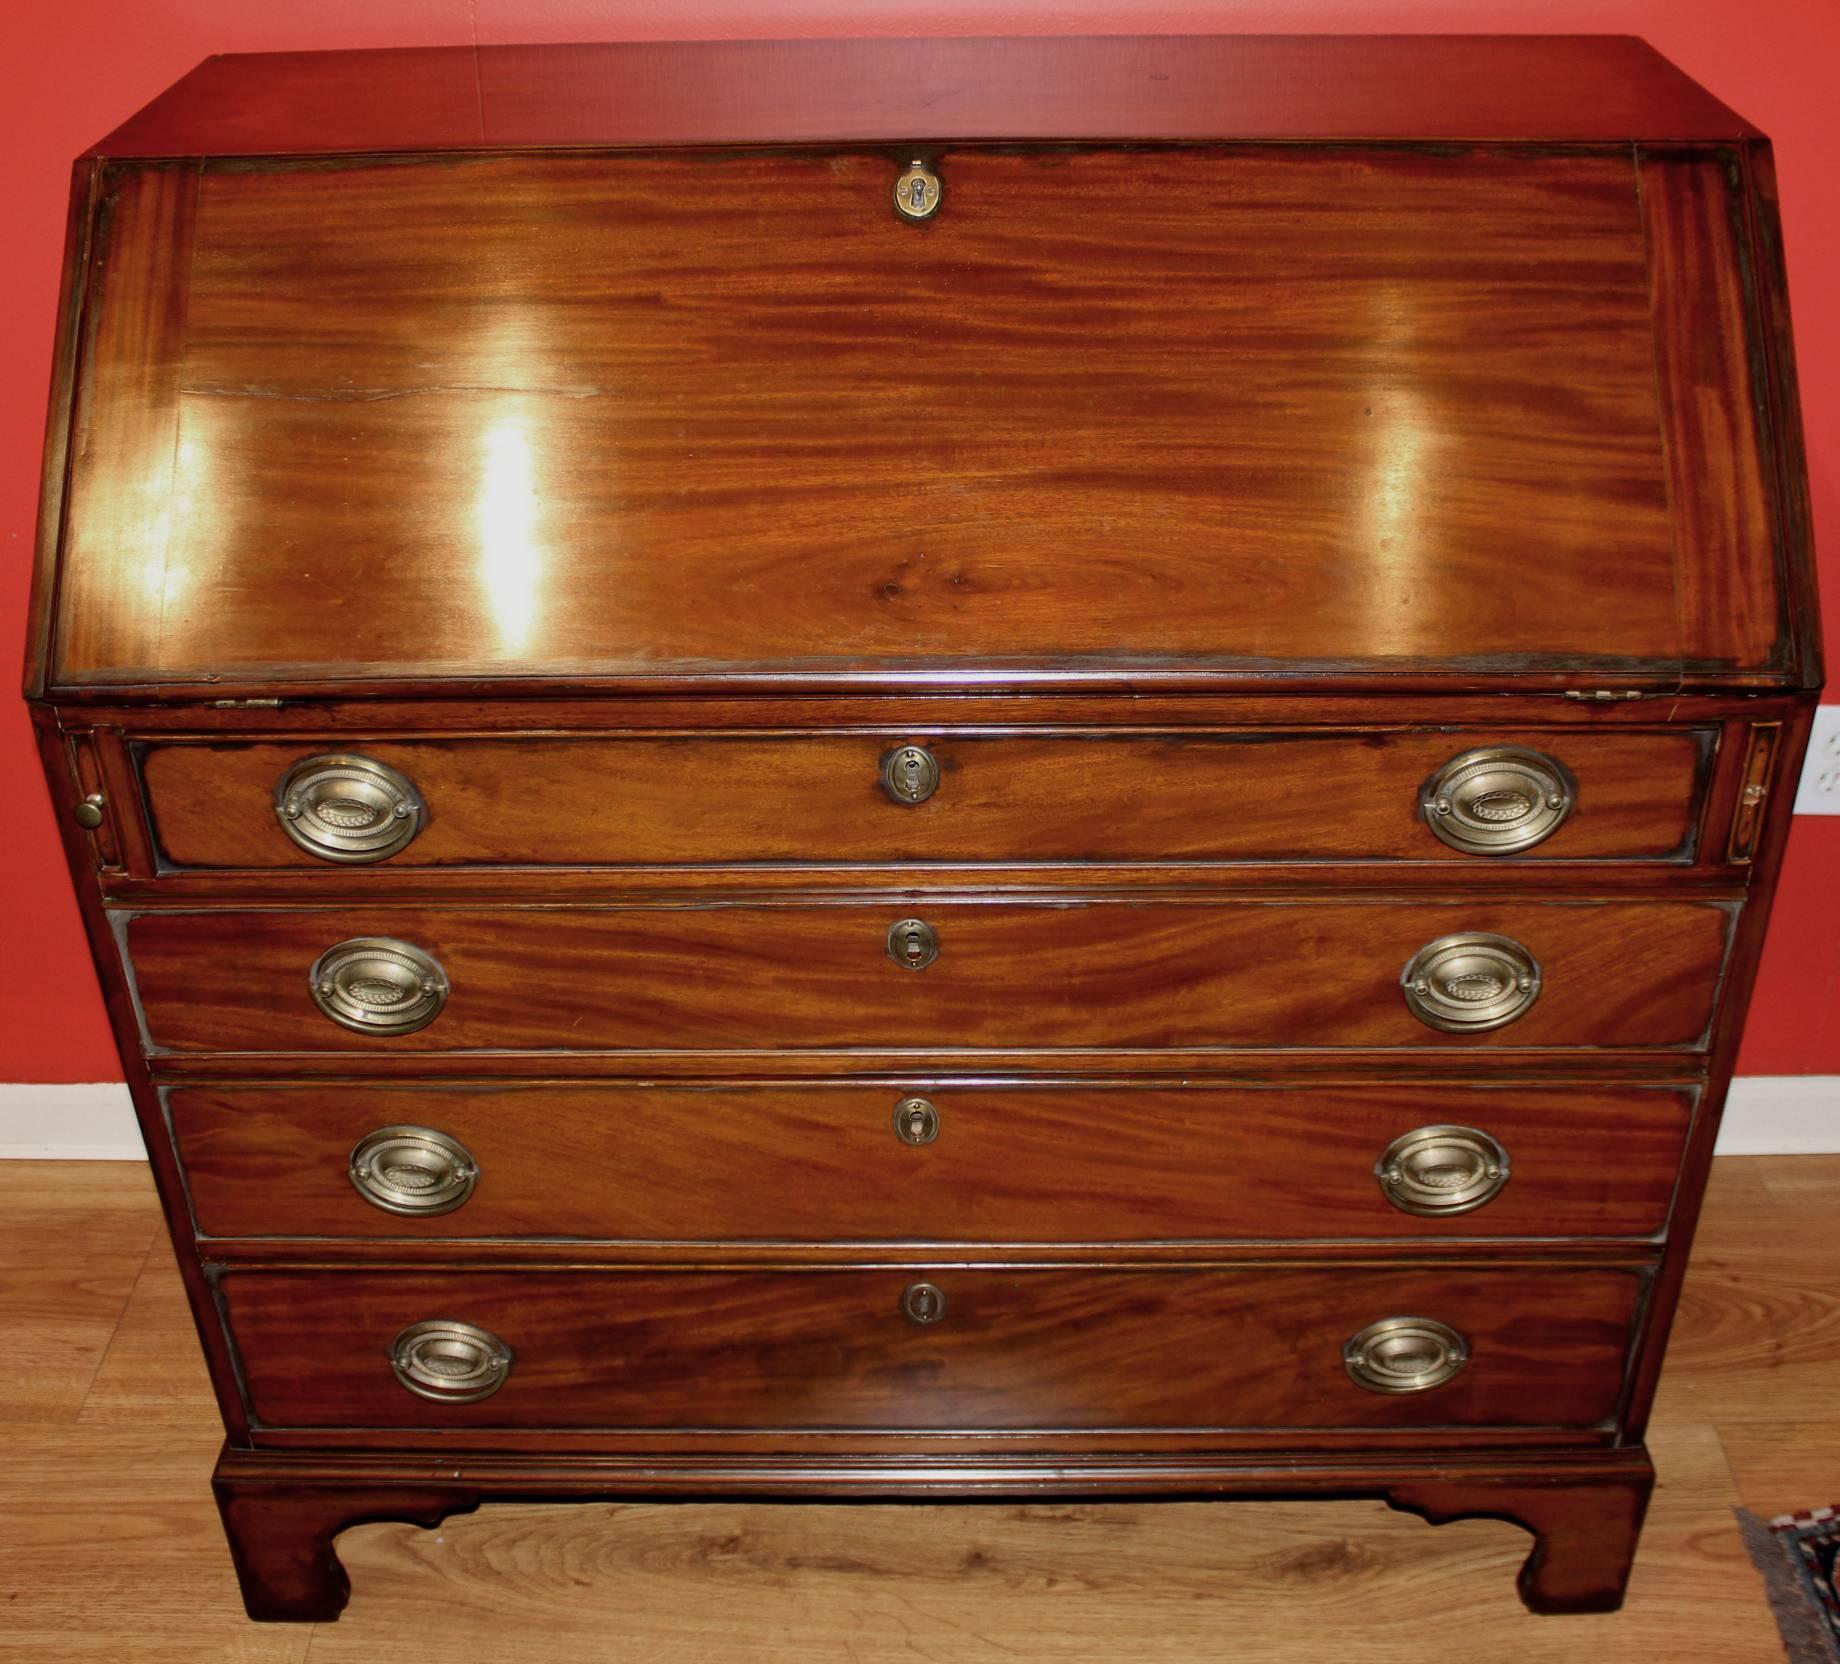 A fine American federal mahogany slant front desk with compartmentalized interior, including six drawers and eight valanced pigeon holes, over four graduated drawers, all supported by nicely proportioned bracket feet. Appears to have retained its